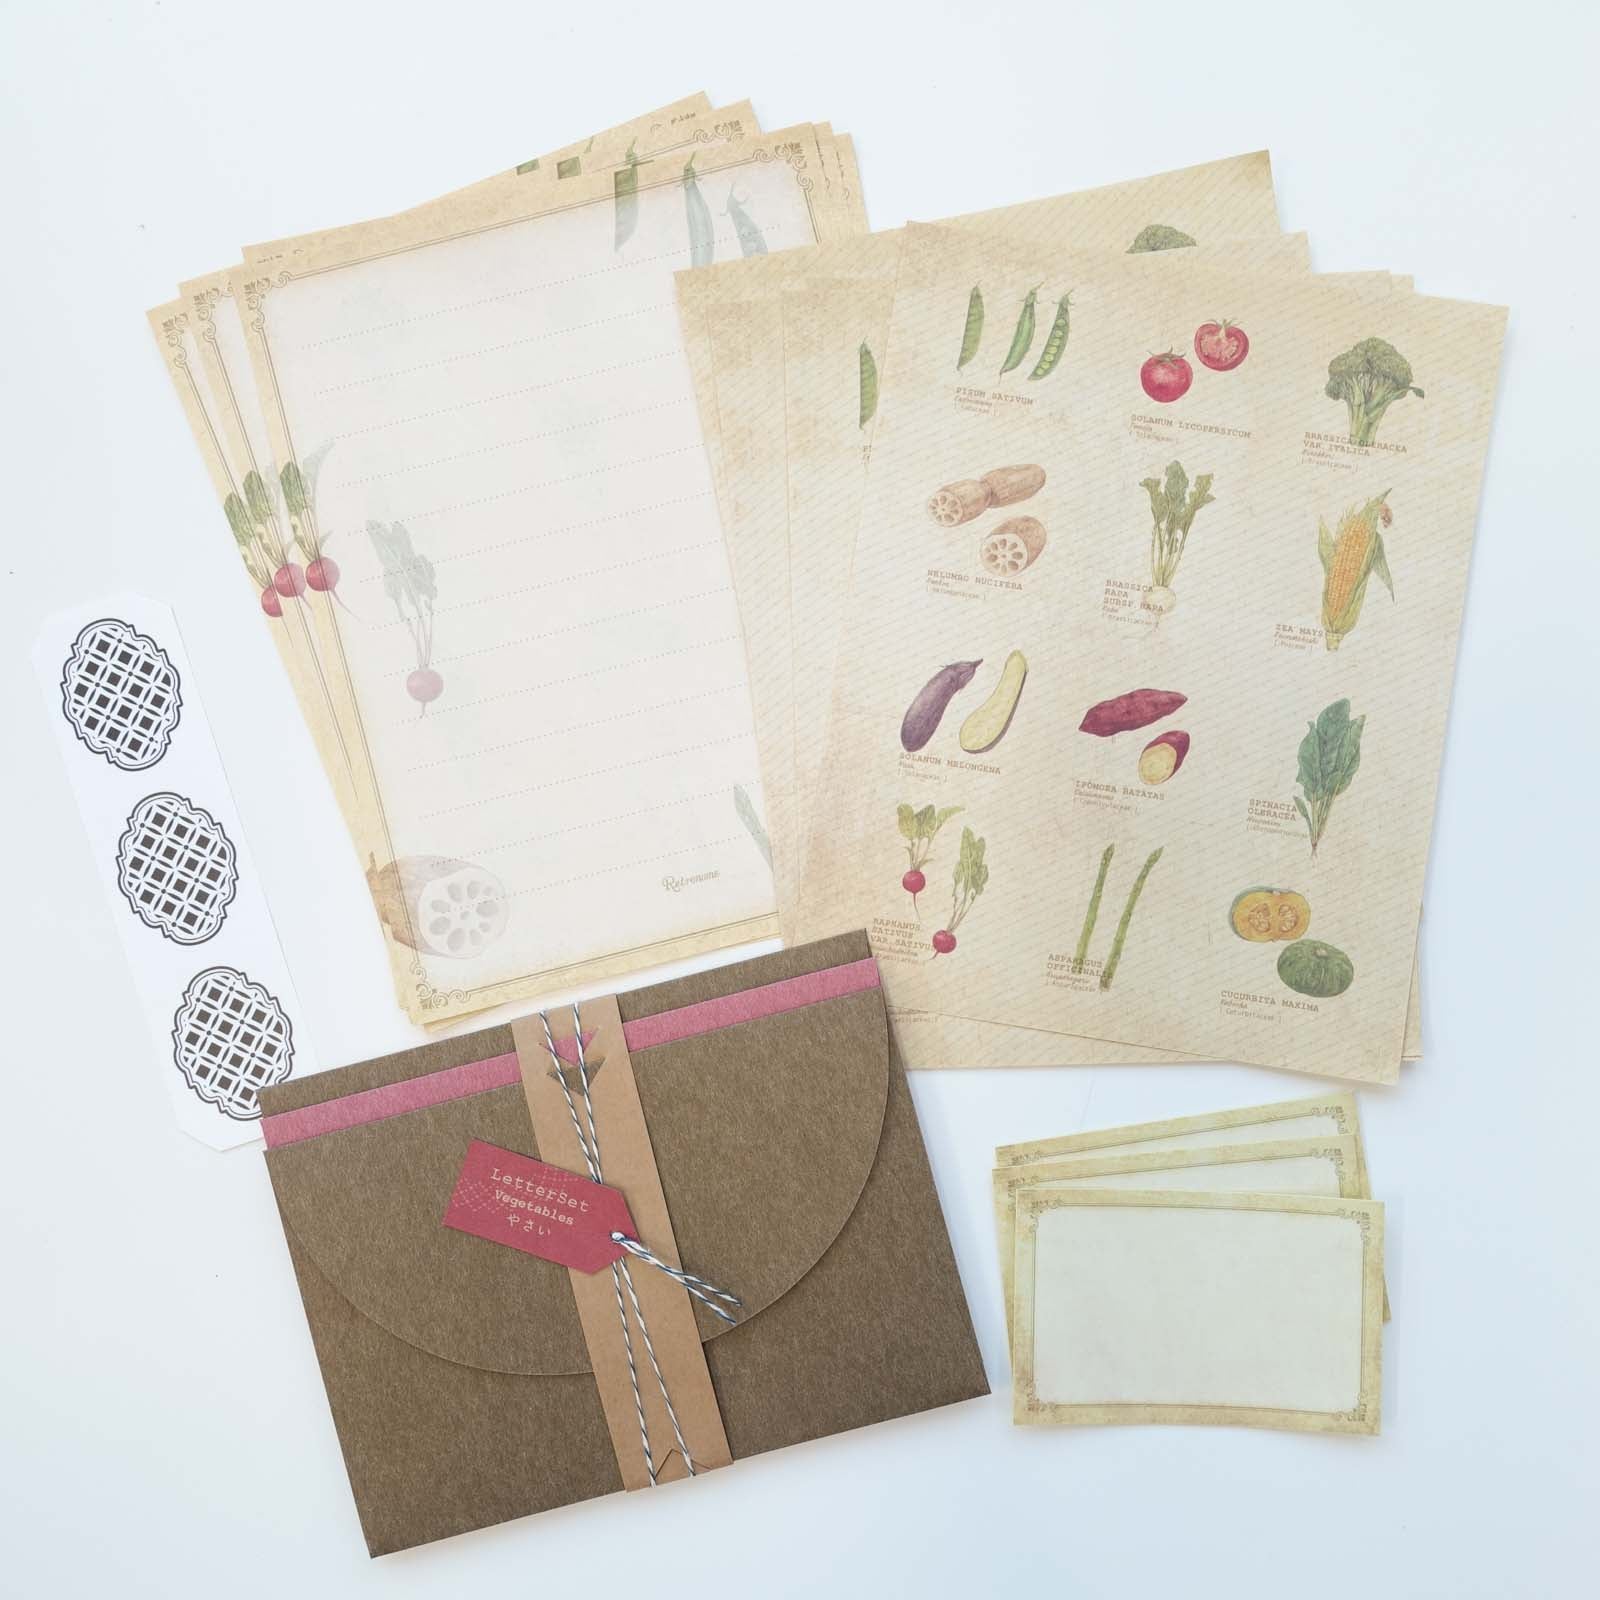 Vintage style premium, double sided, letter writing set featuring vegetable illustrations